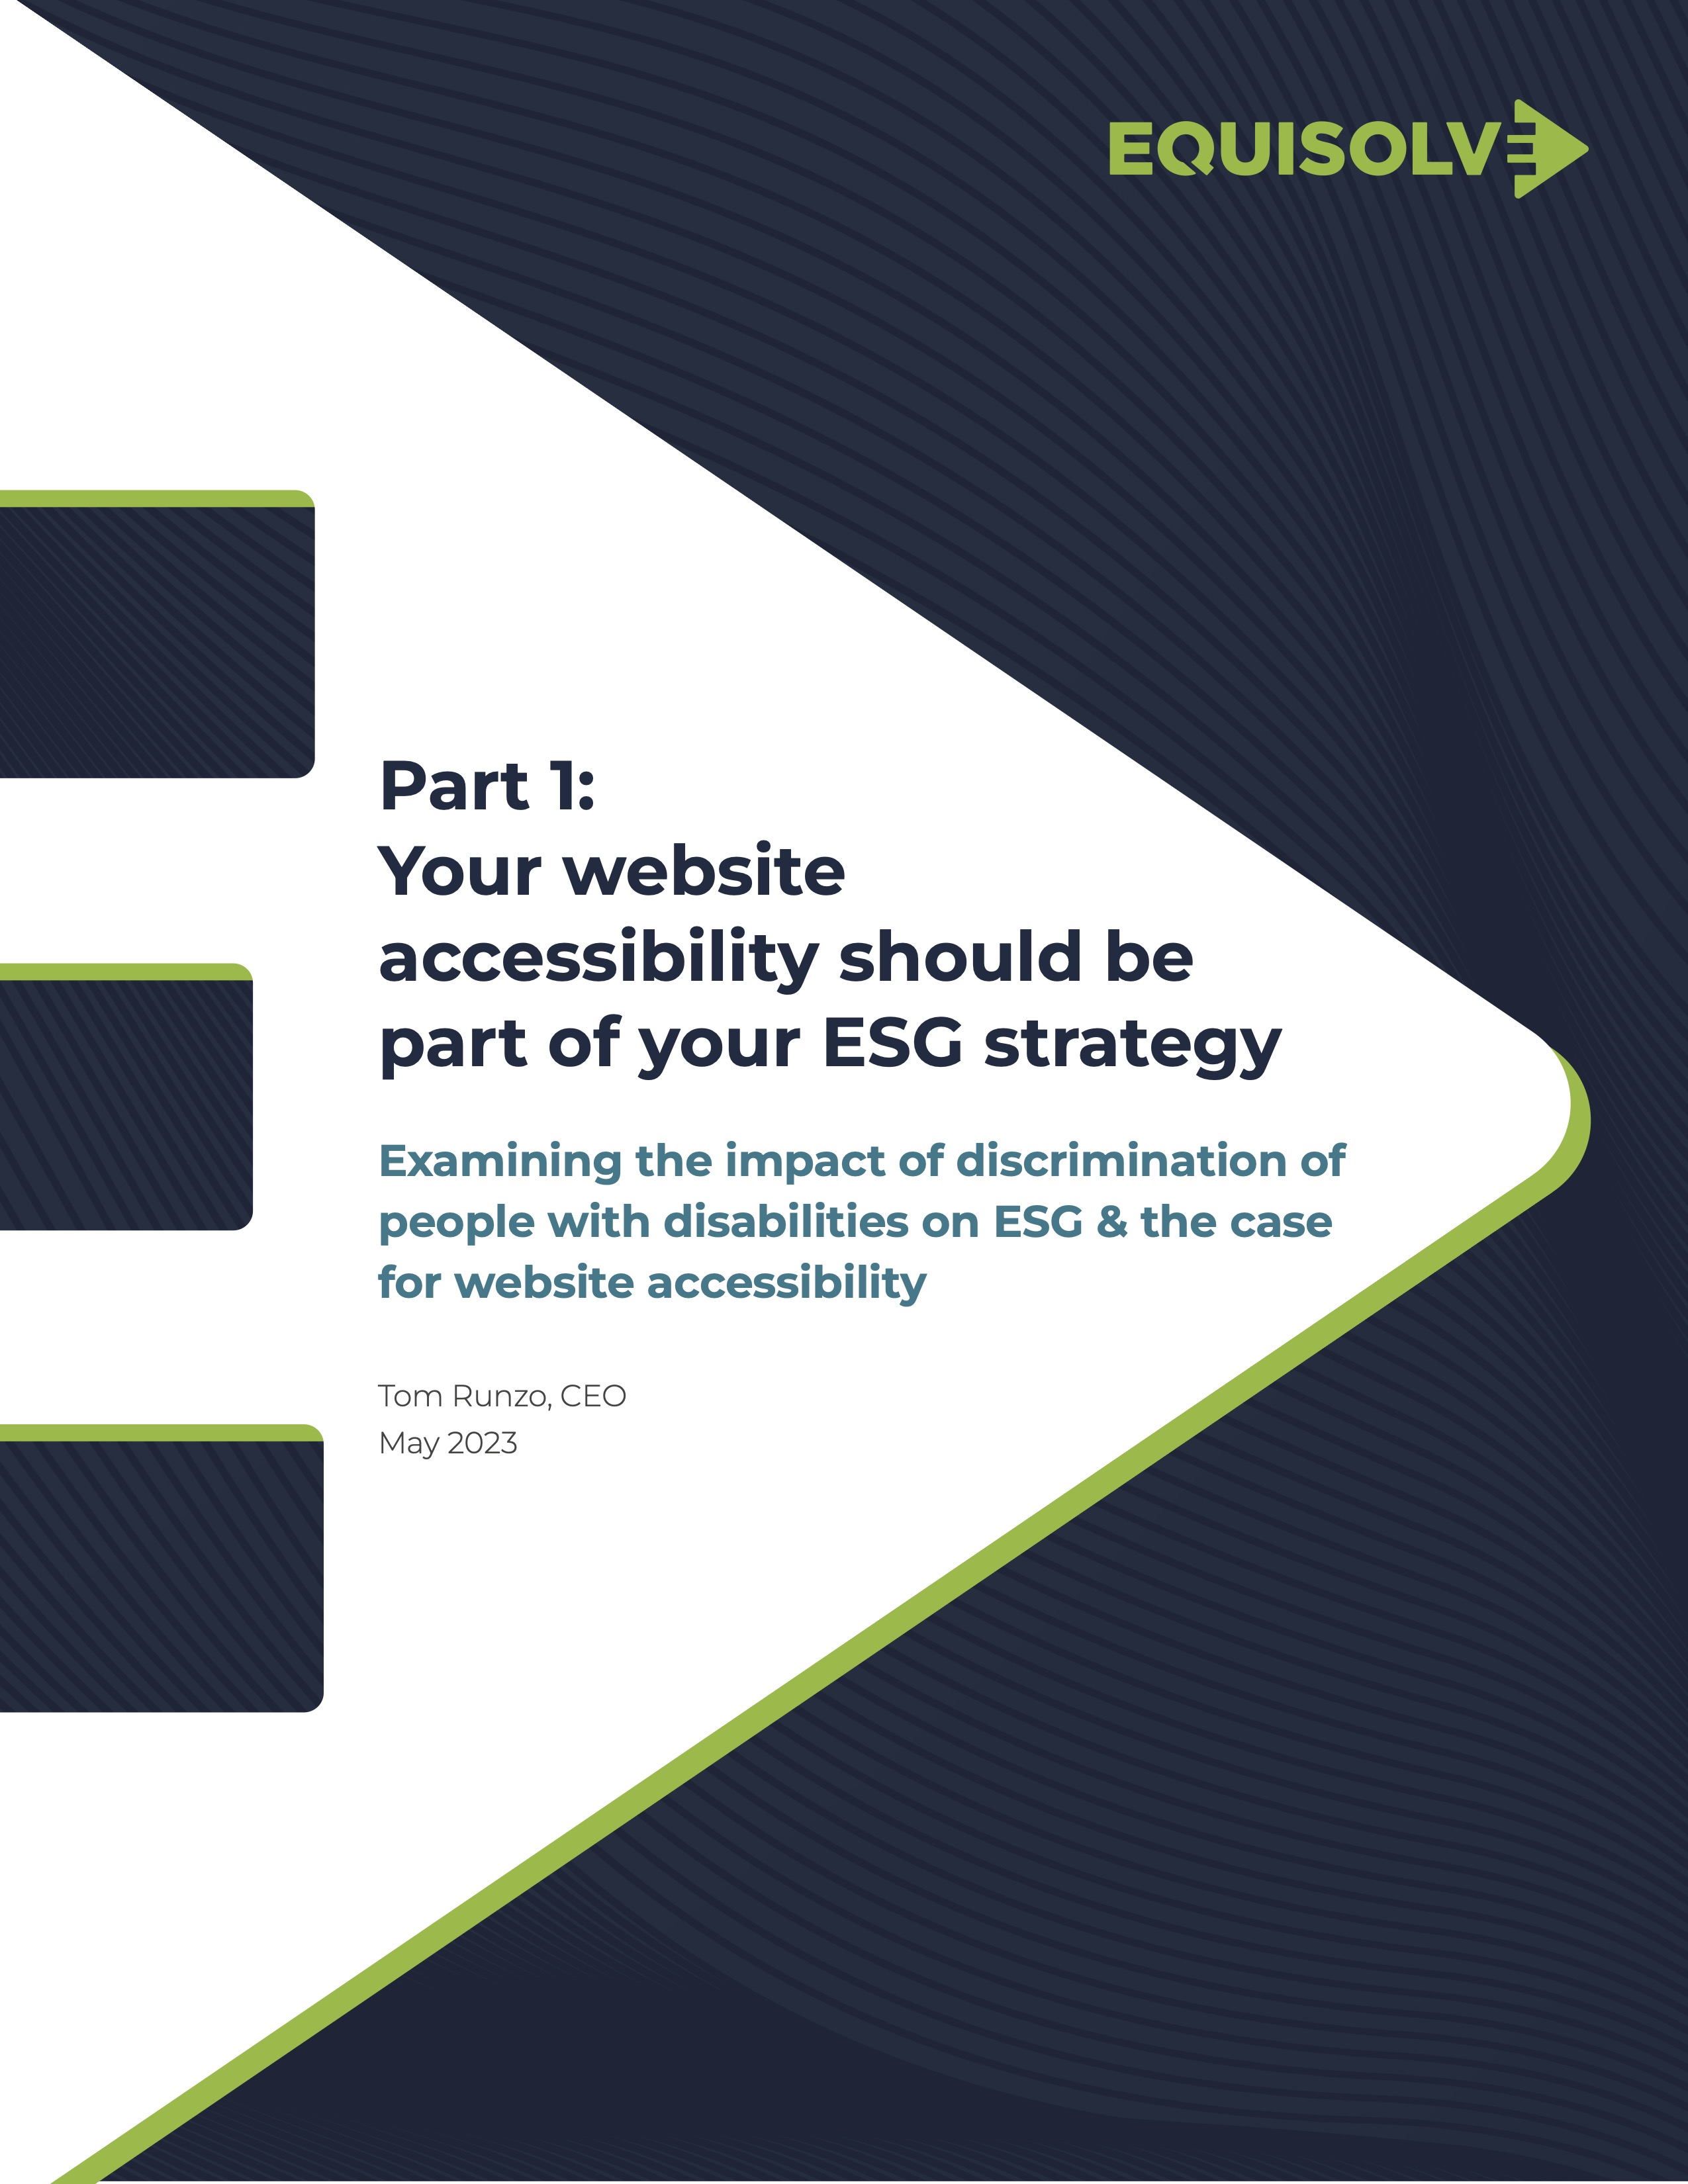 Part 1: Your website accessibility should be part of your ESG strategy